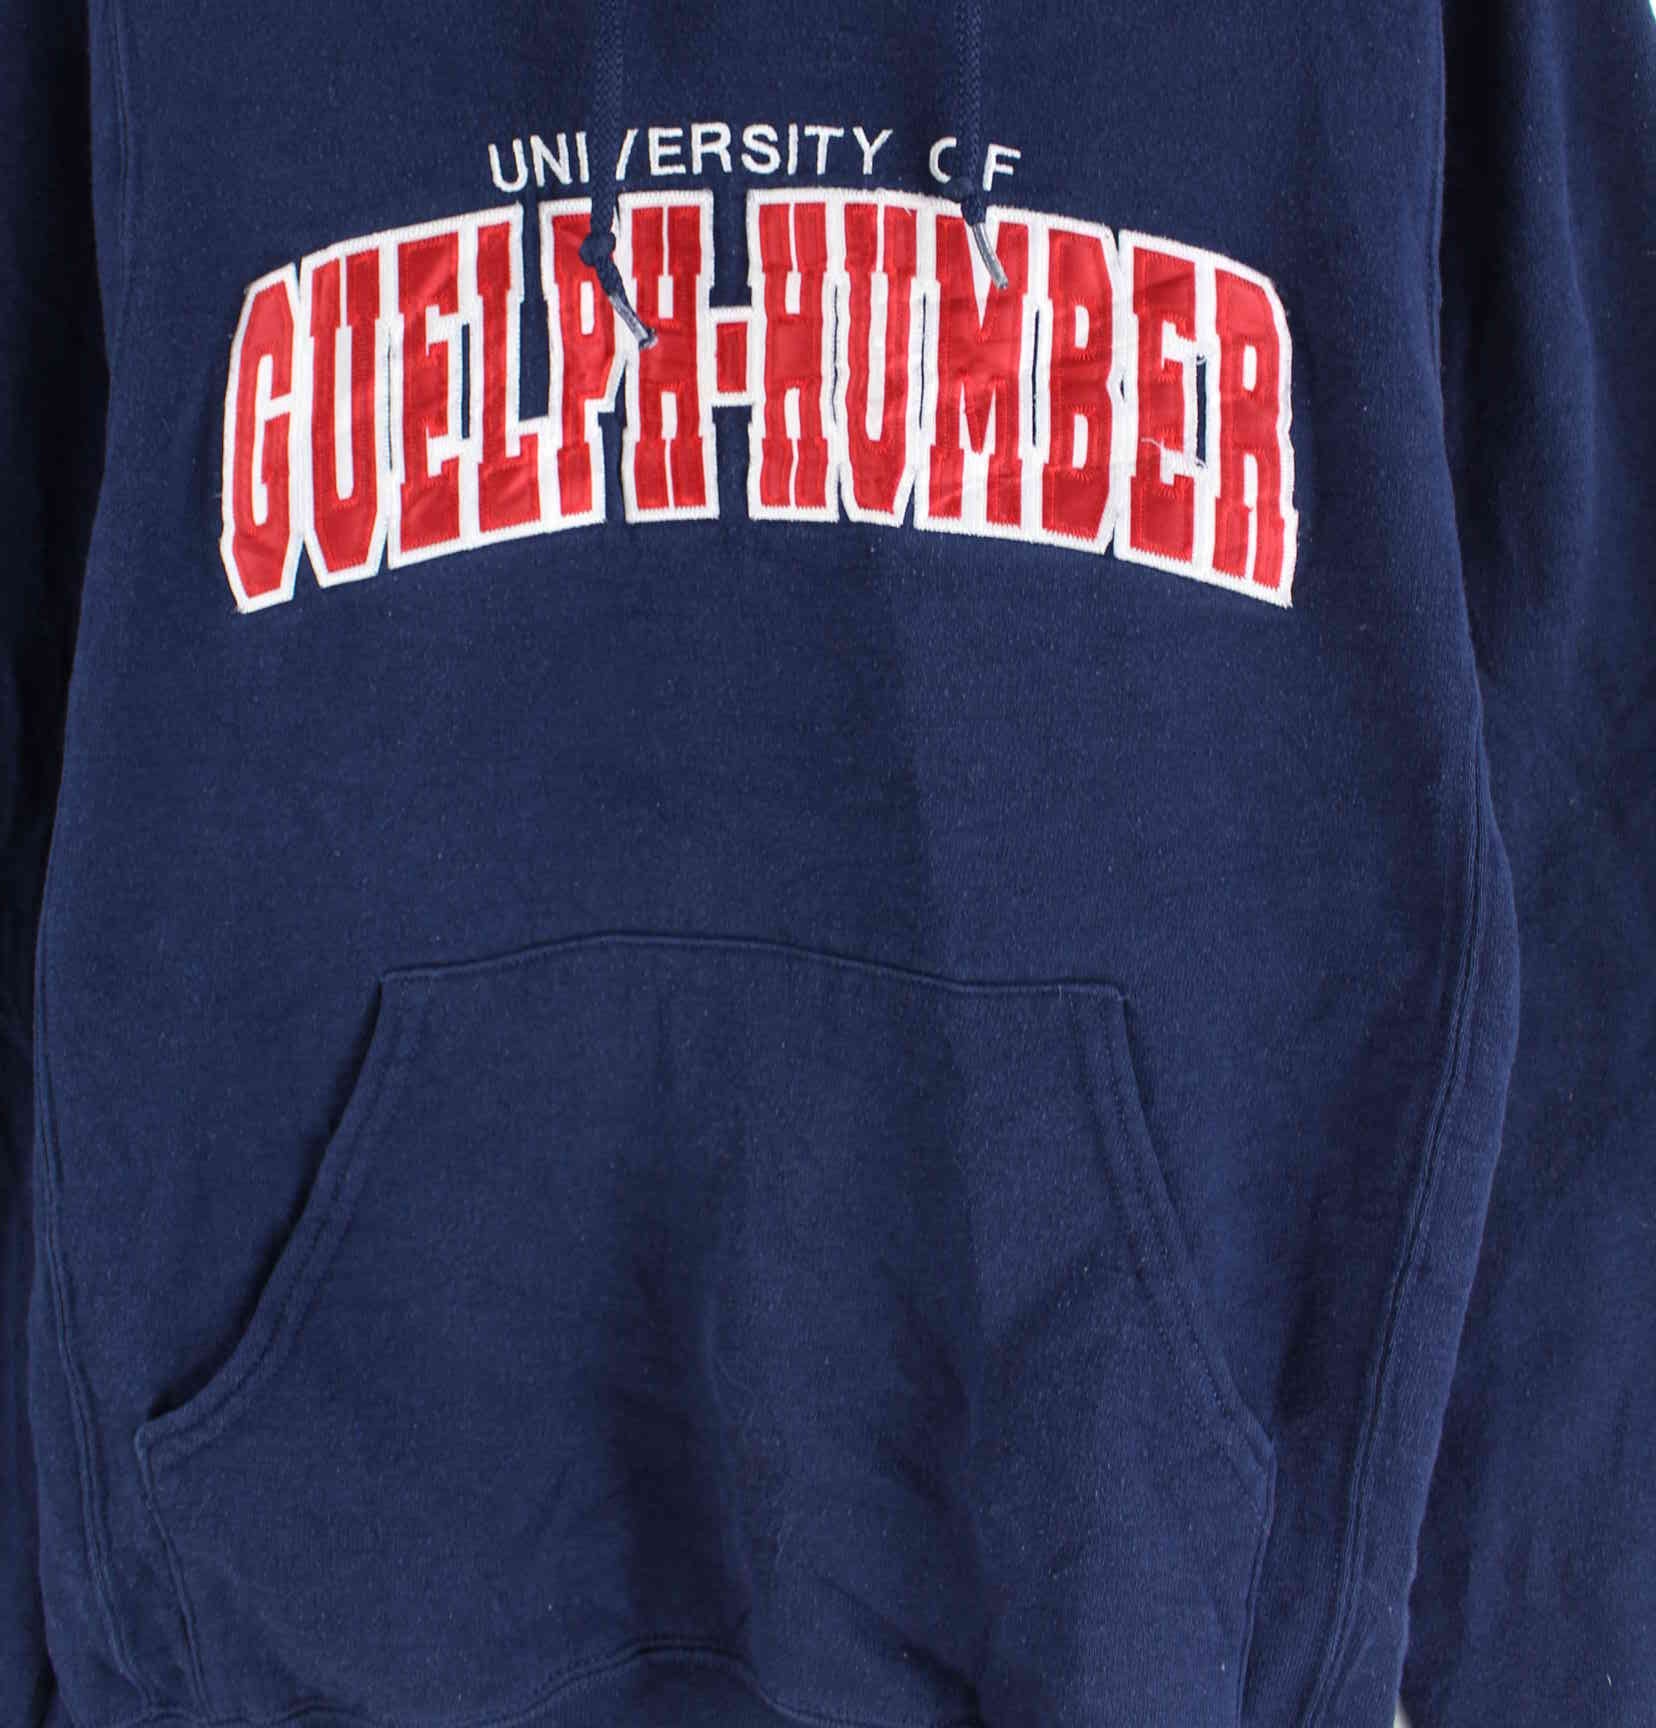 Russell Athletic Guelph-Humber Embroidered Hoodie Blau S (detail image 1)